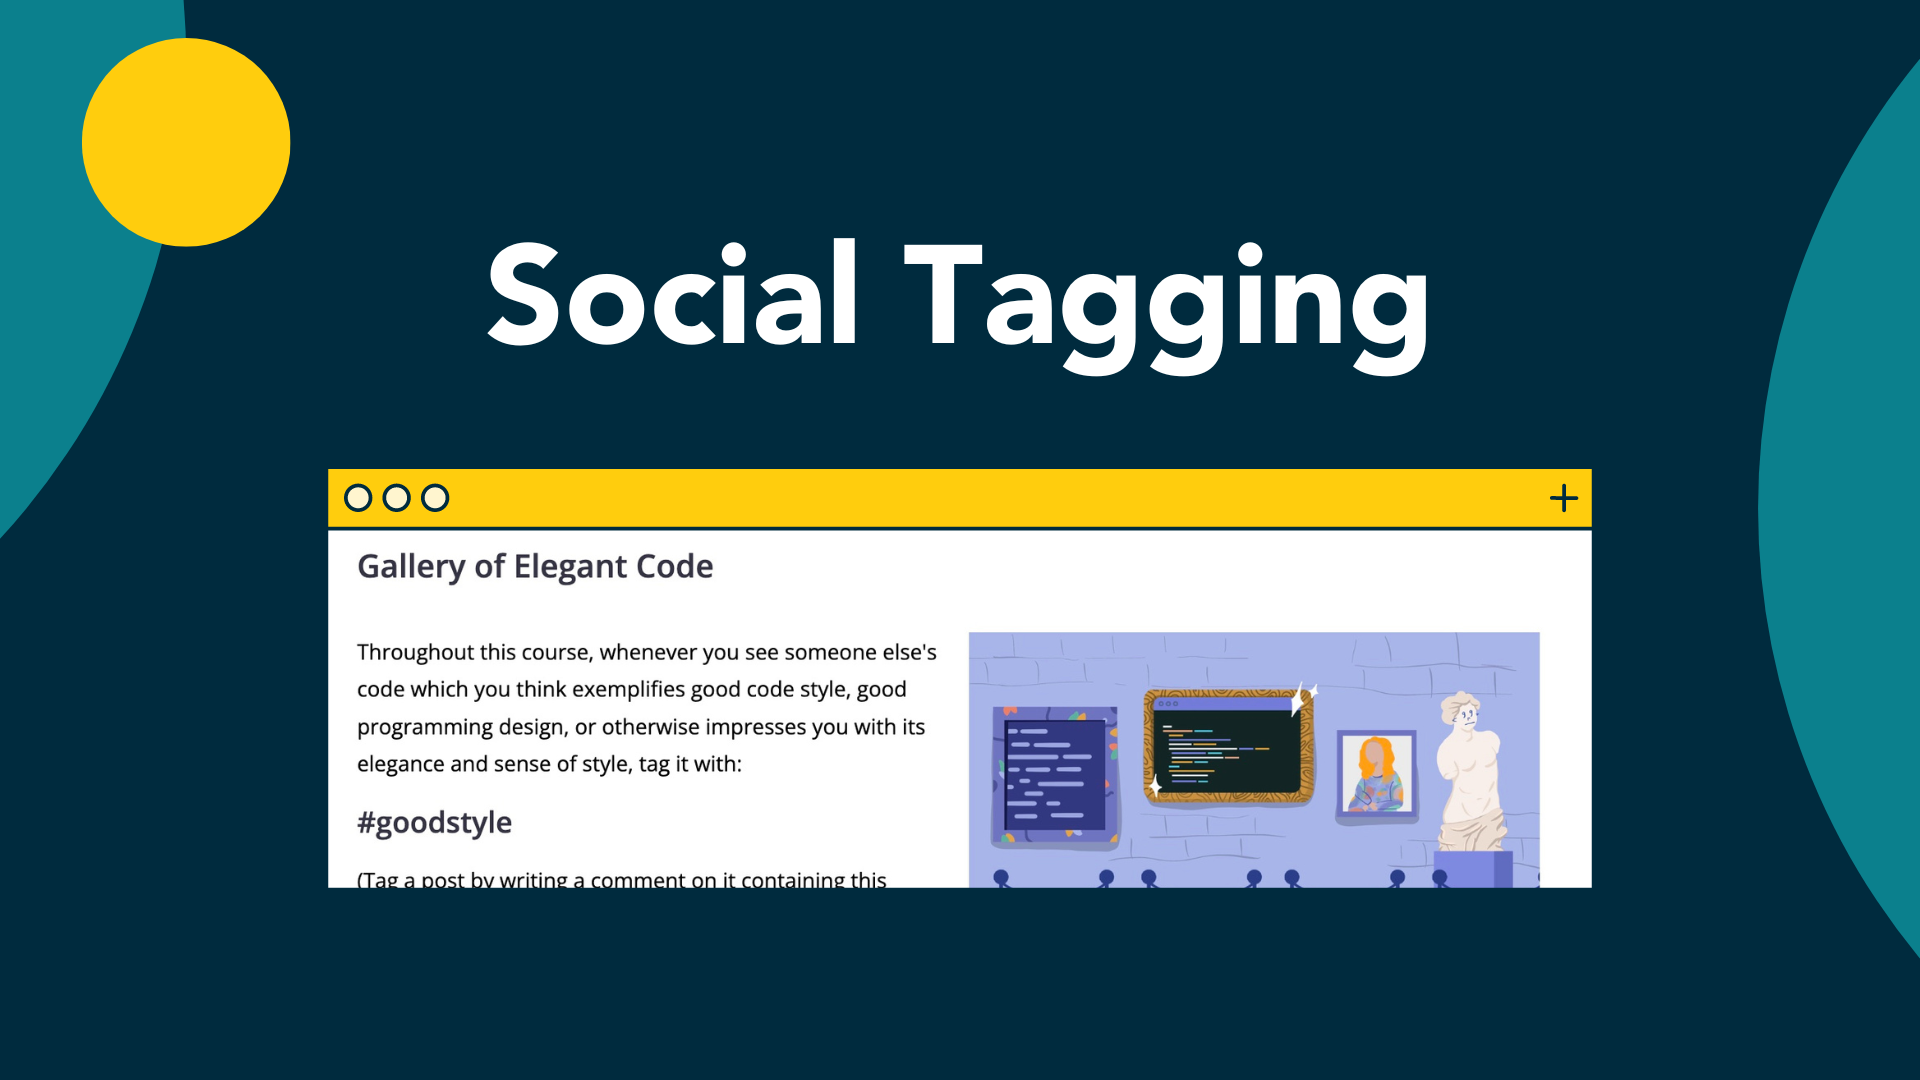 [Tutorial] How to Design a Social Tagging Activity to Encourage Peer Recognition